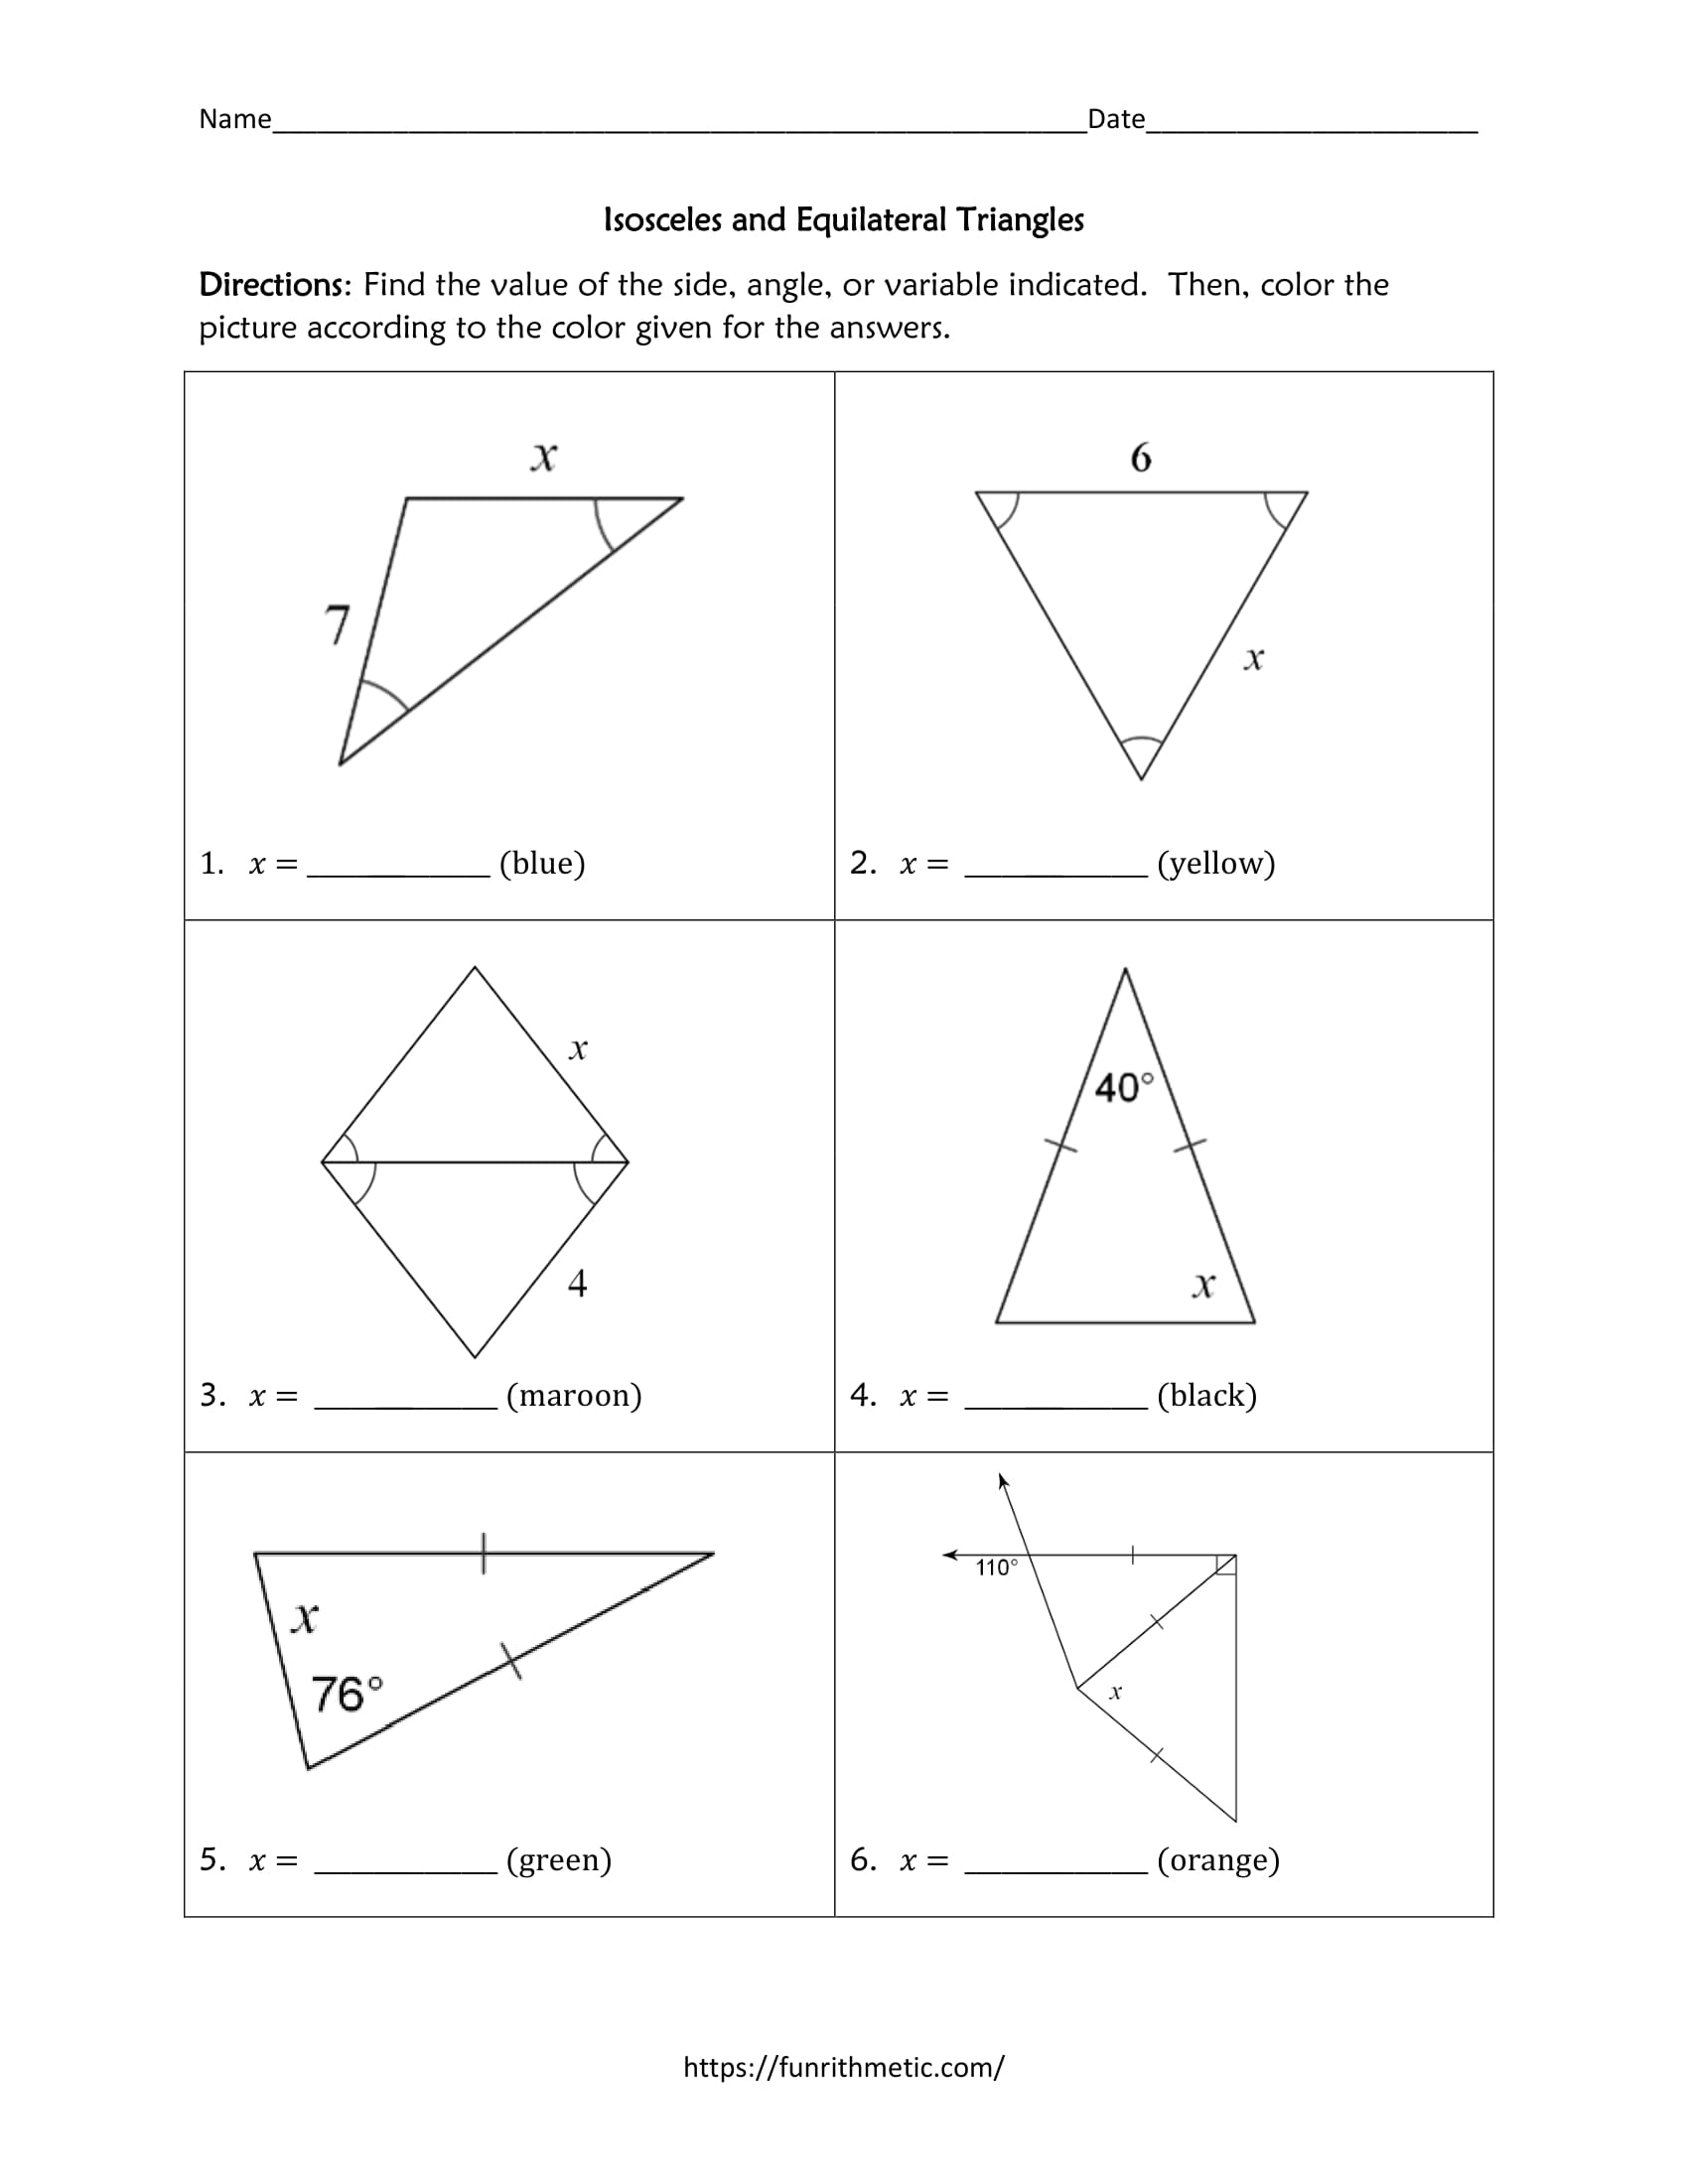 Answer Key Isosceles And Equilateral Triangles Worksheet Answers Studying Worksheets